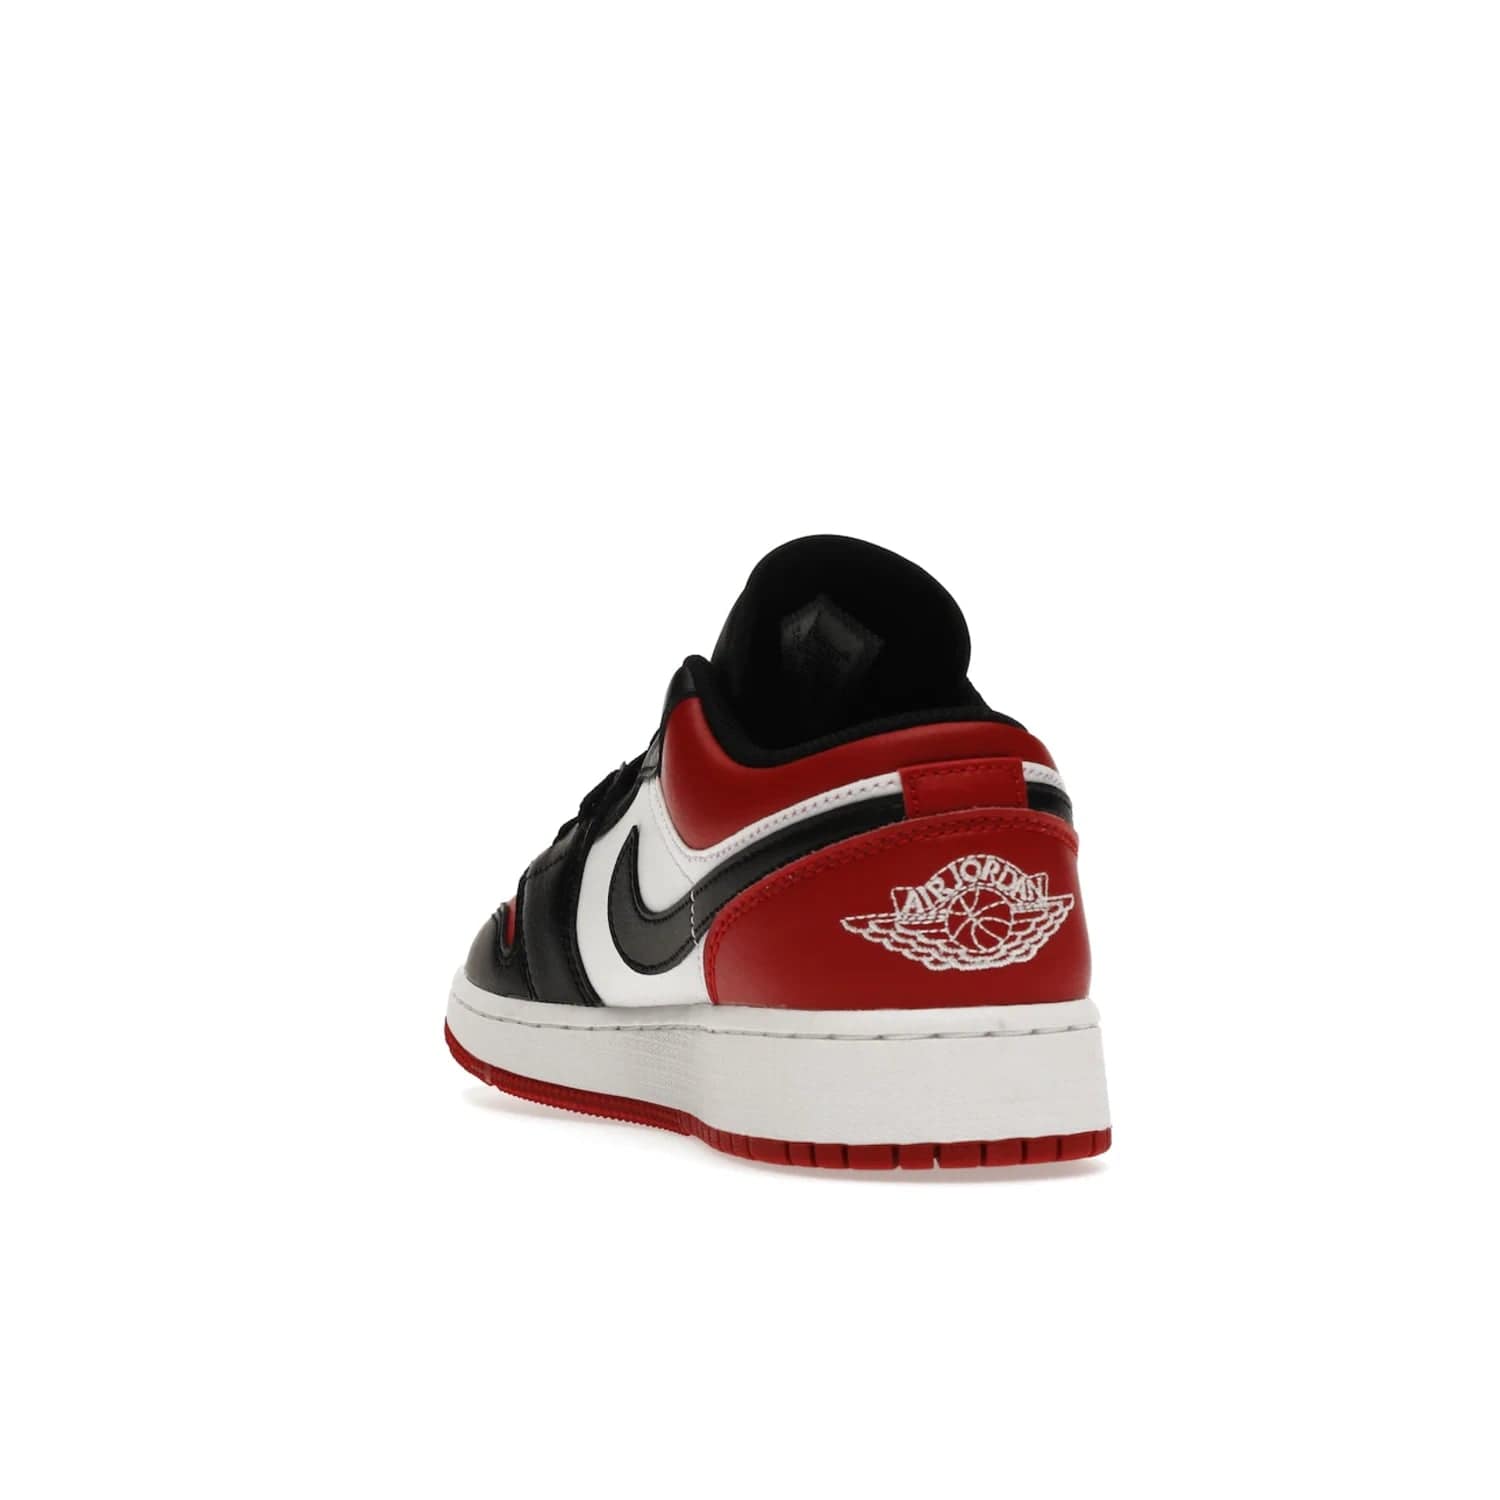 Jordan 1 Low Bred Toe (GS) - Image 26 - Only at www.BallersClubKickz.com - #
Iconic sneaker from Jordan brand with classic colorway, unique detailing & Air Jordan Wings logo. Step into the shoes of the greats with the Jordan 1 Low Bred Toe GS!